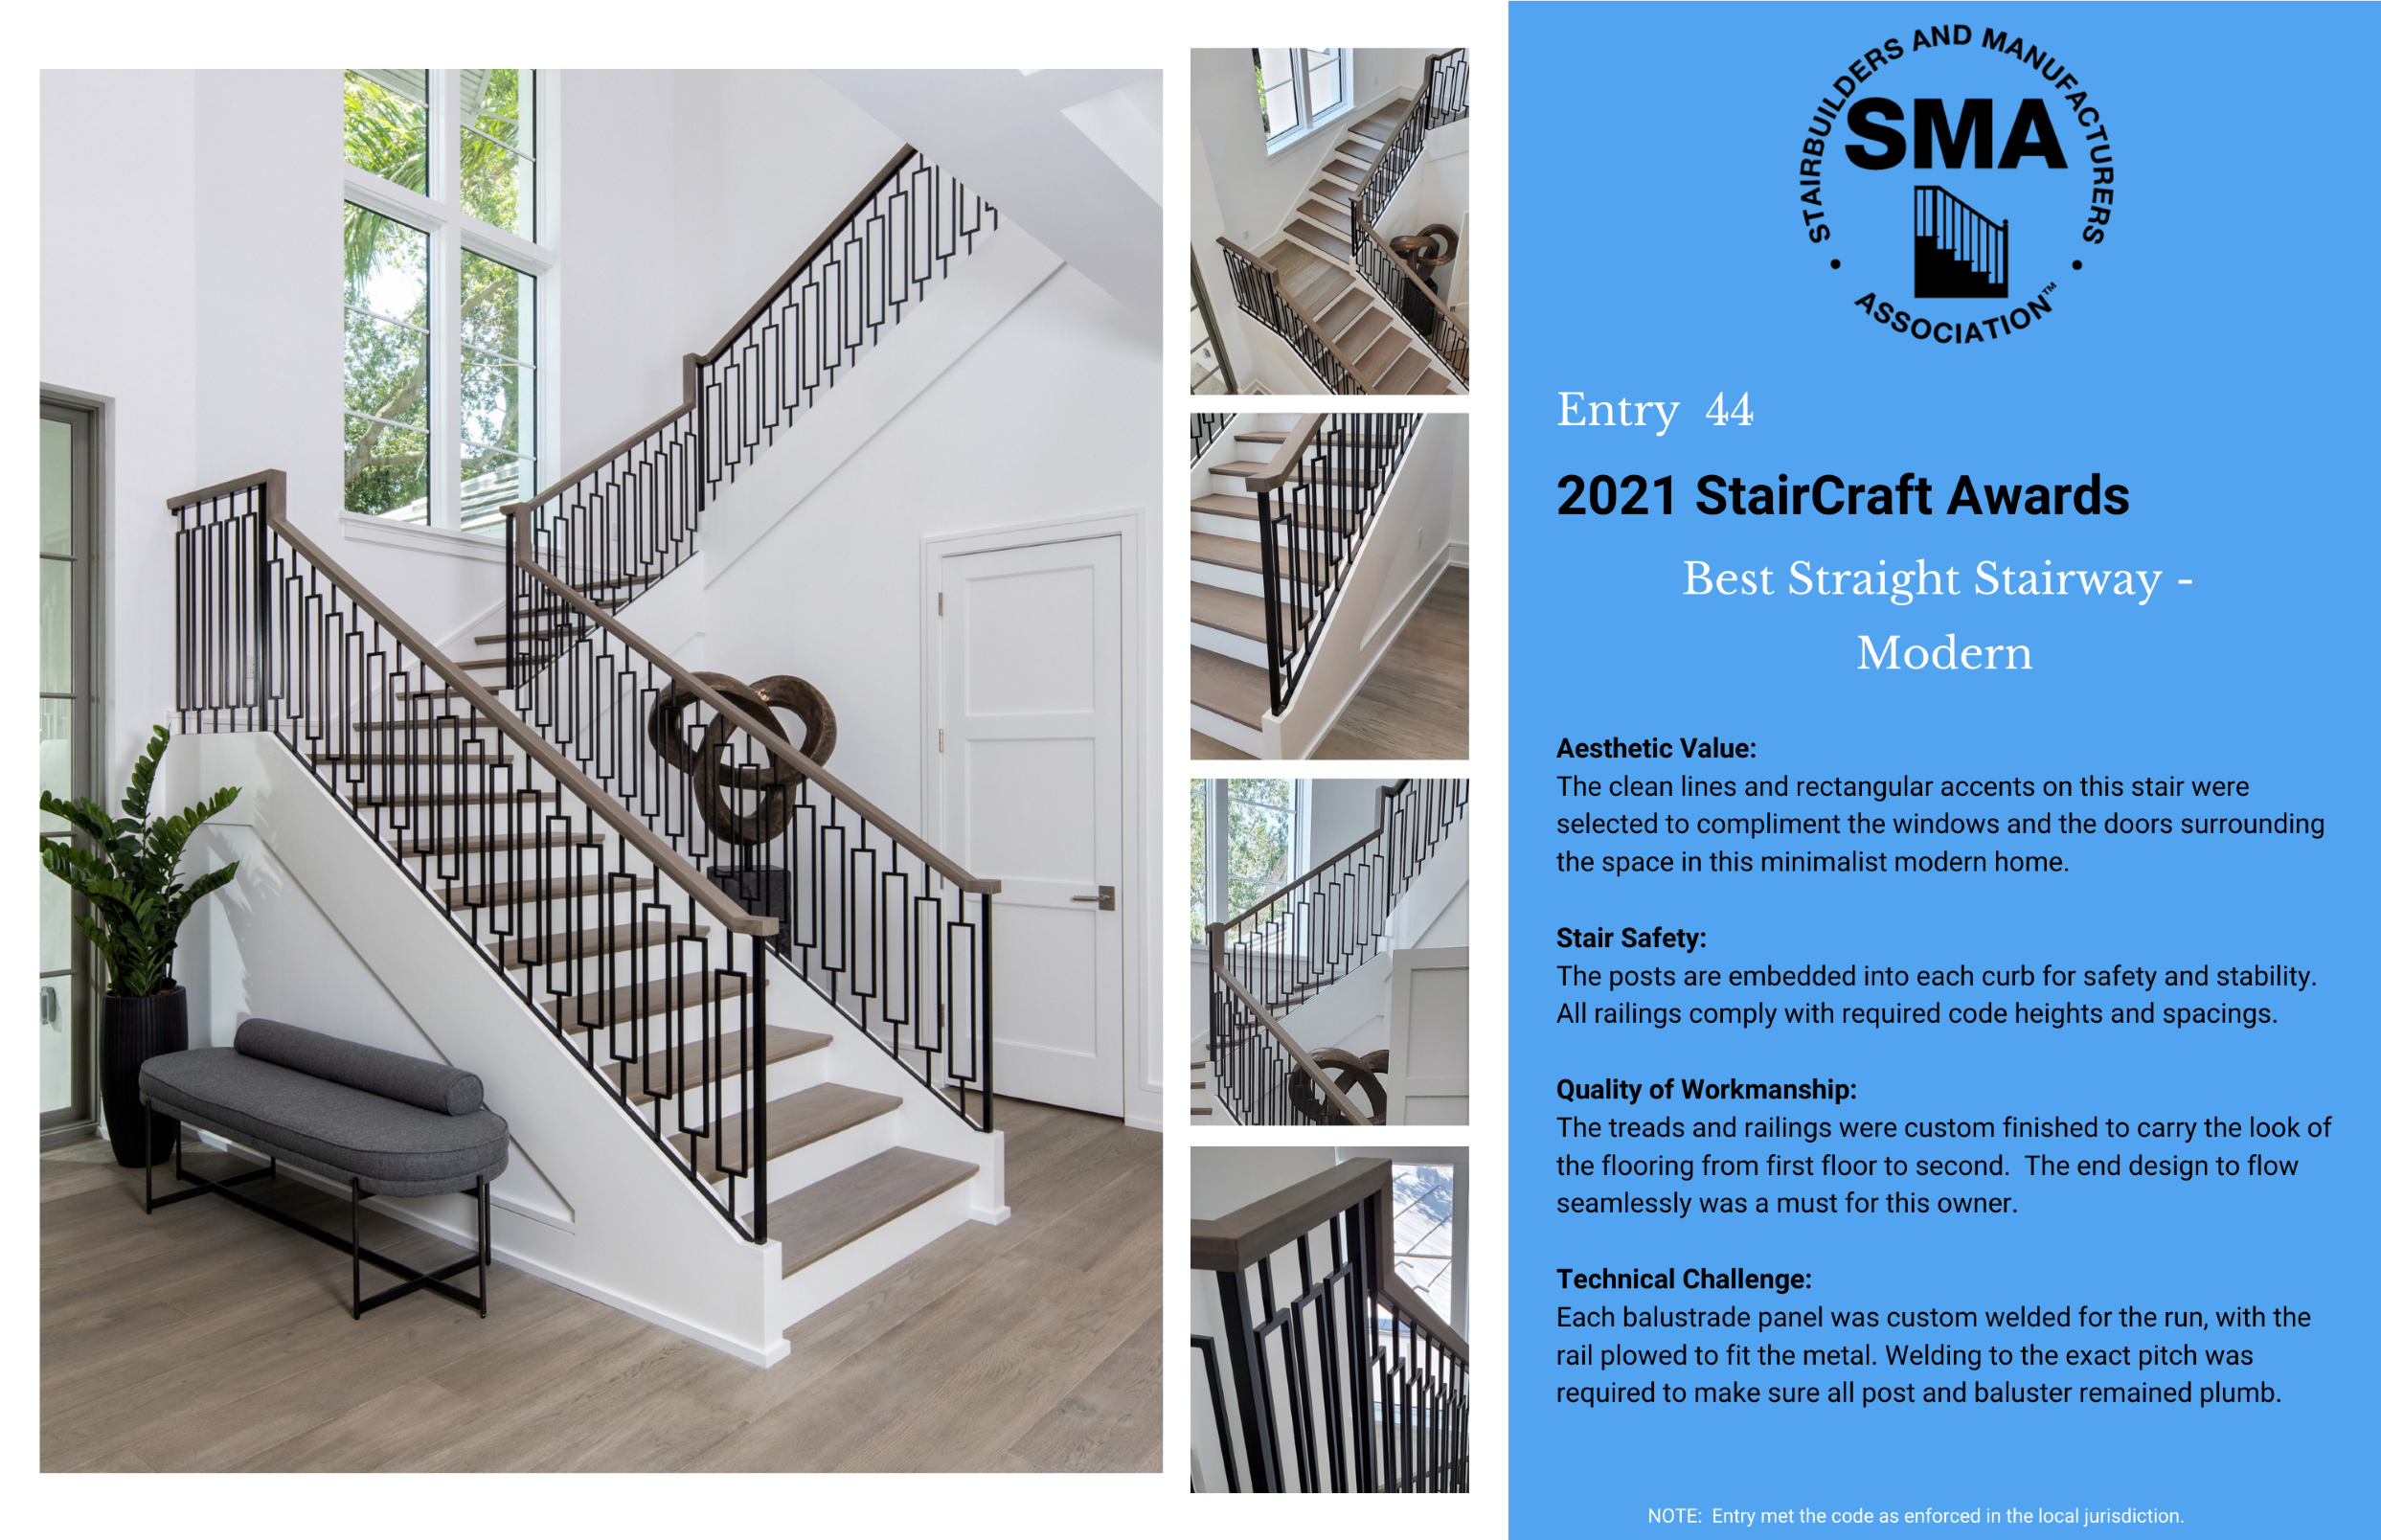 2021 StairCraft Awards Entry 44